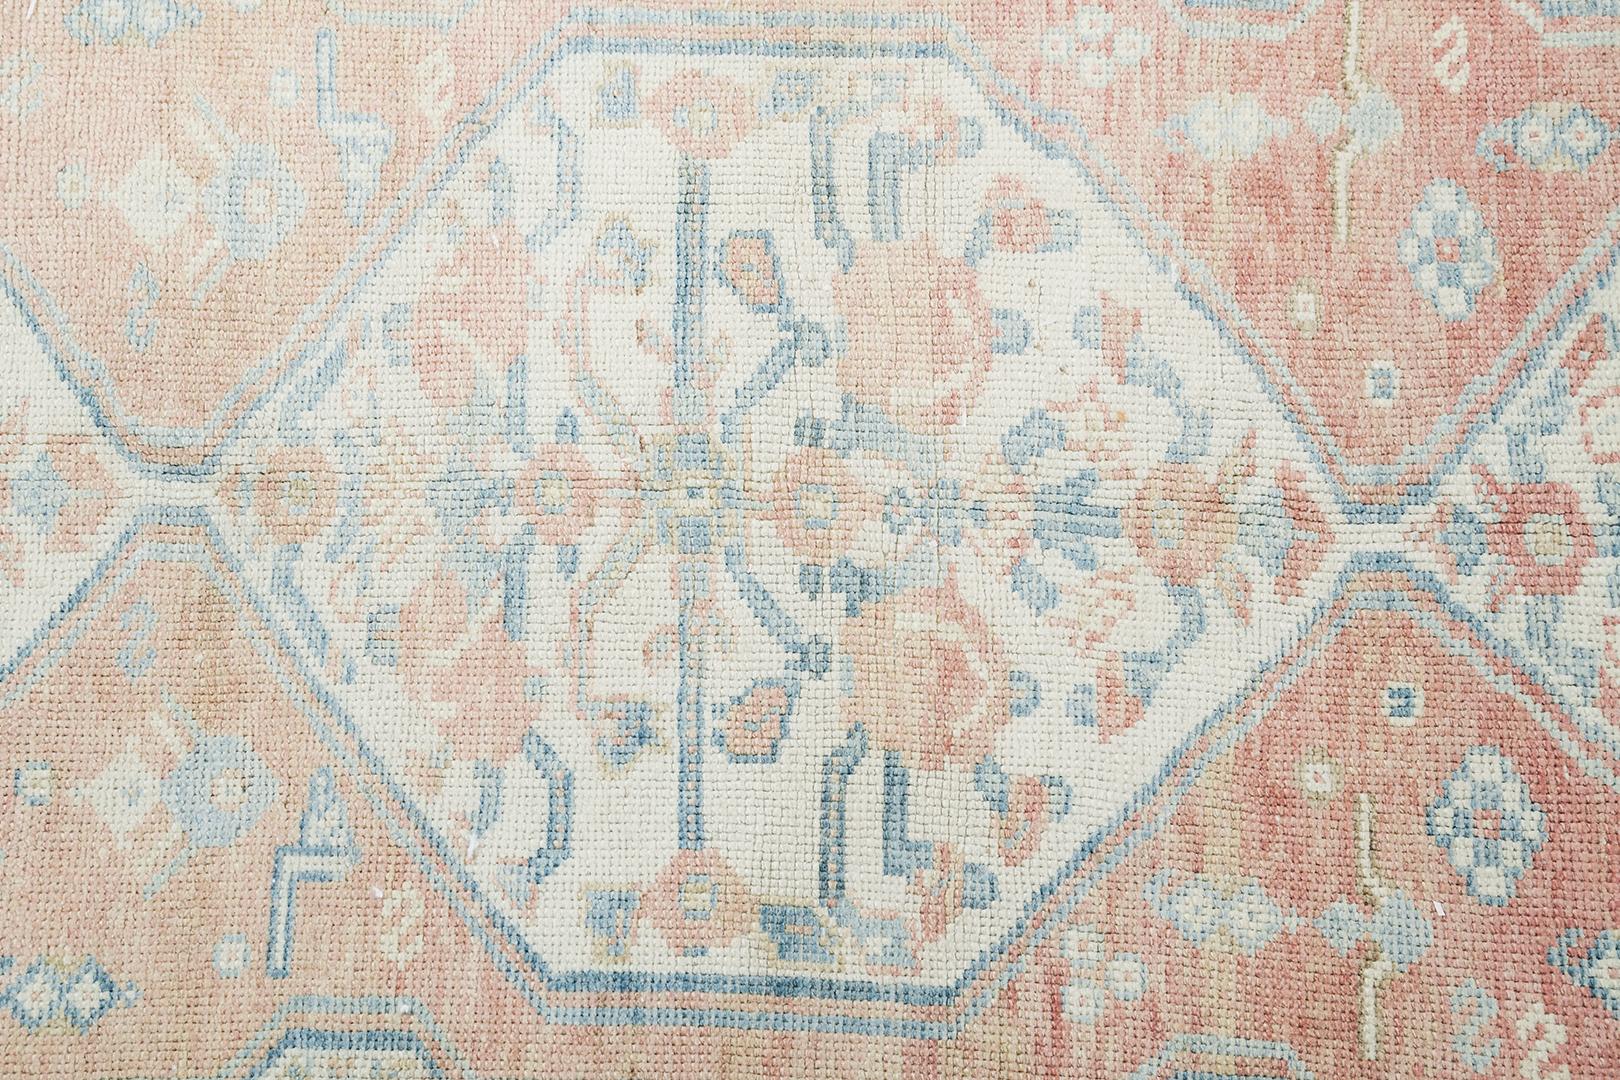 With its features cusped botanical medallions and mesmerizing well-balanced symmetry, this Vintage Persian Malayer runner would bring a sense of sophisticated elegance to nearly any interior. The abrashed cinnamon field features impressive details